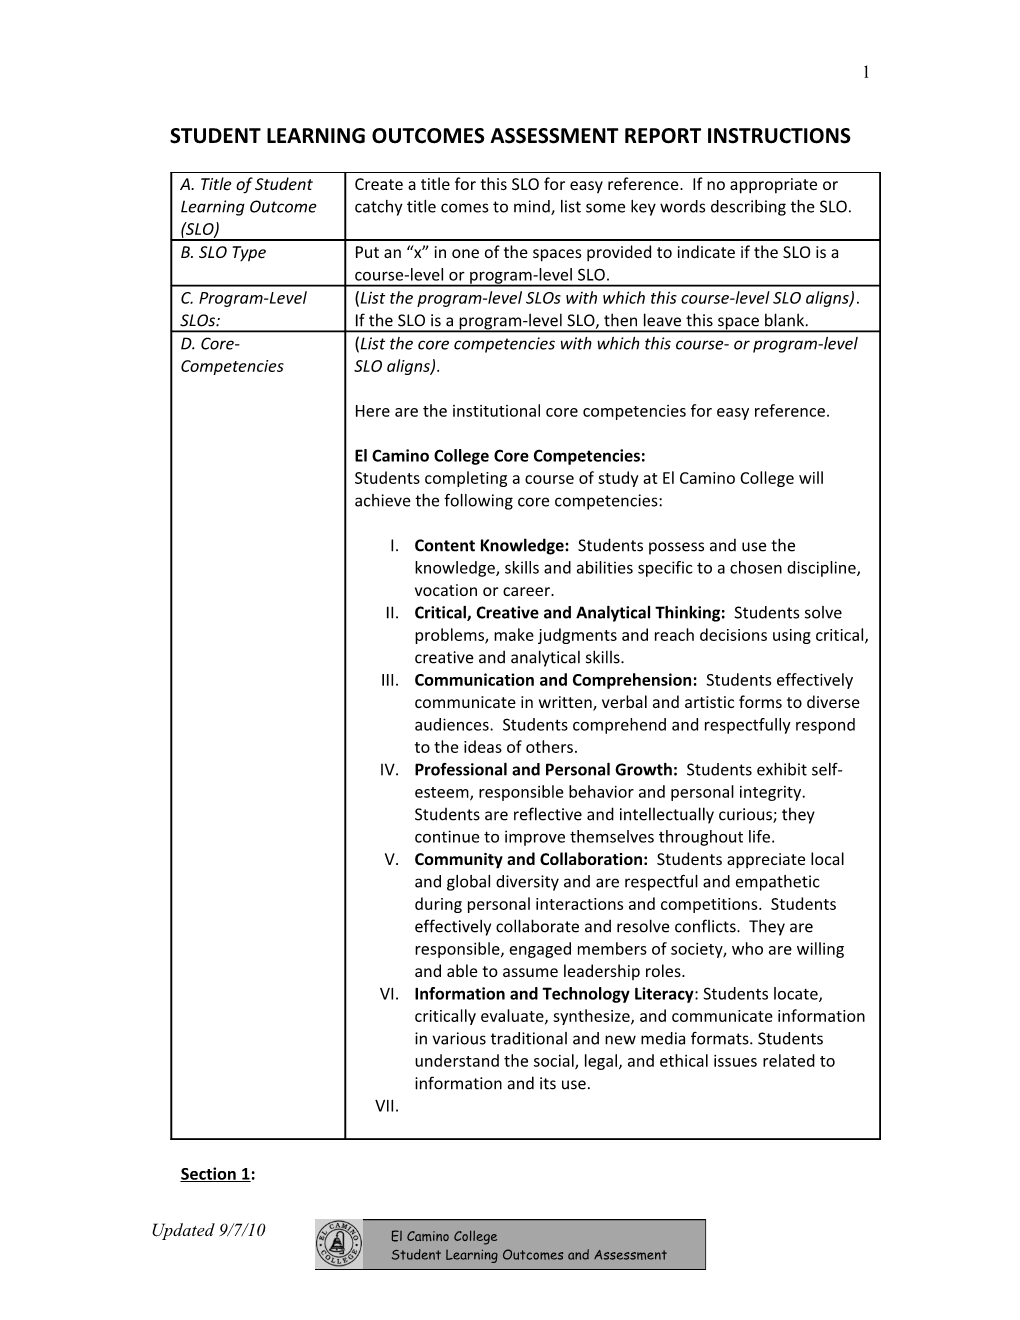 Student Learning Outcomes Assessment Report Instructions